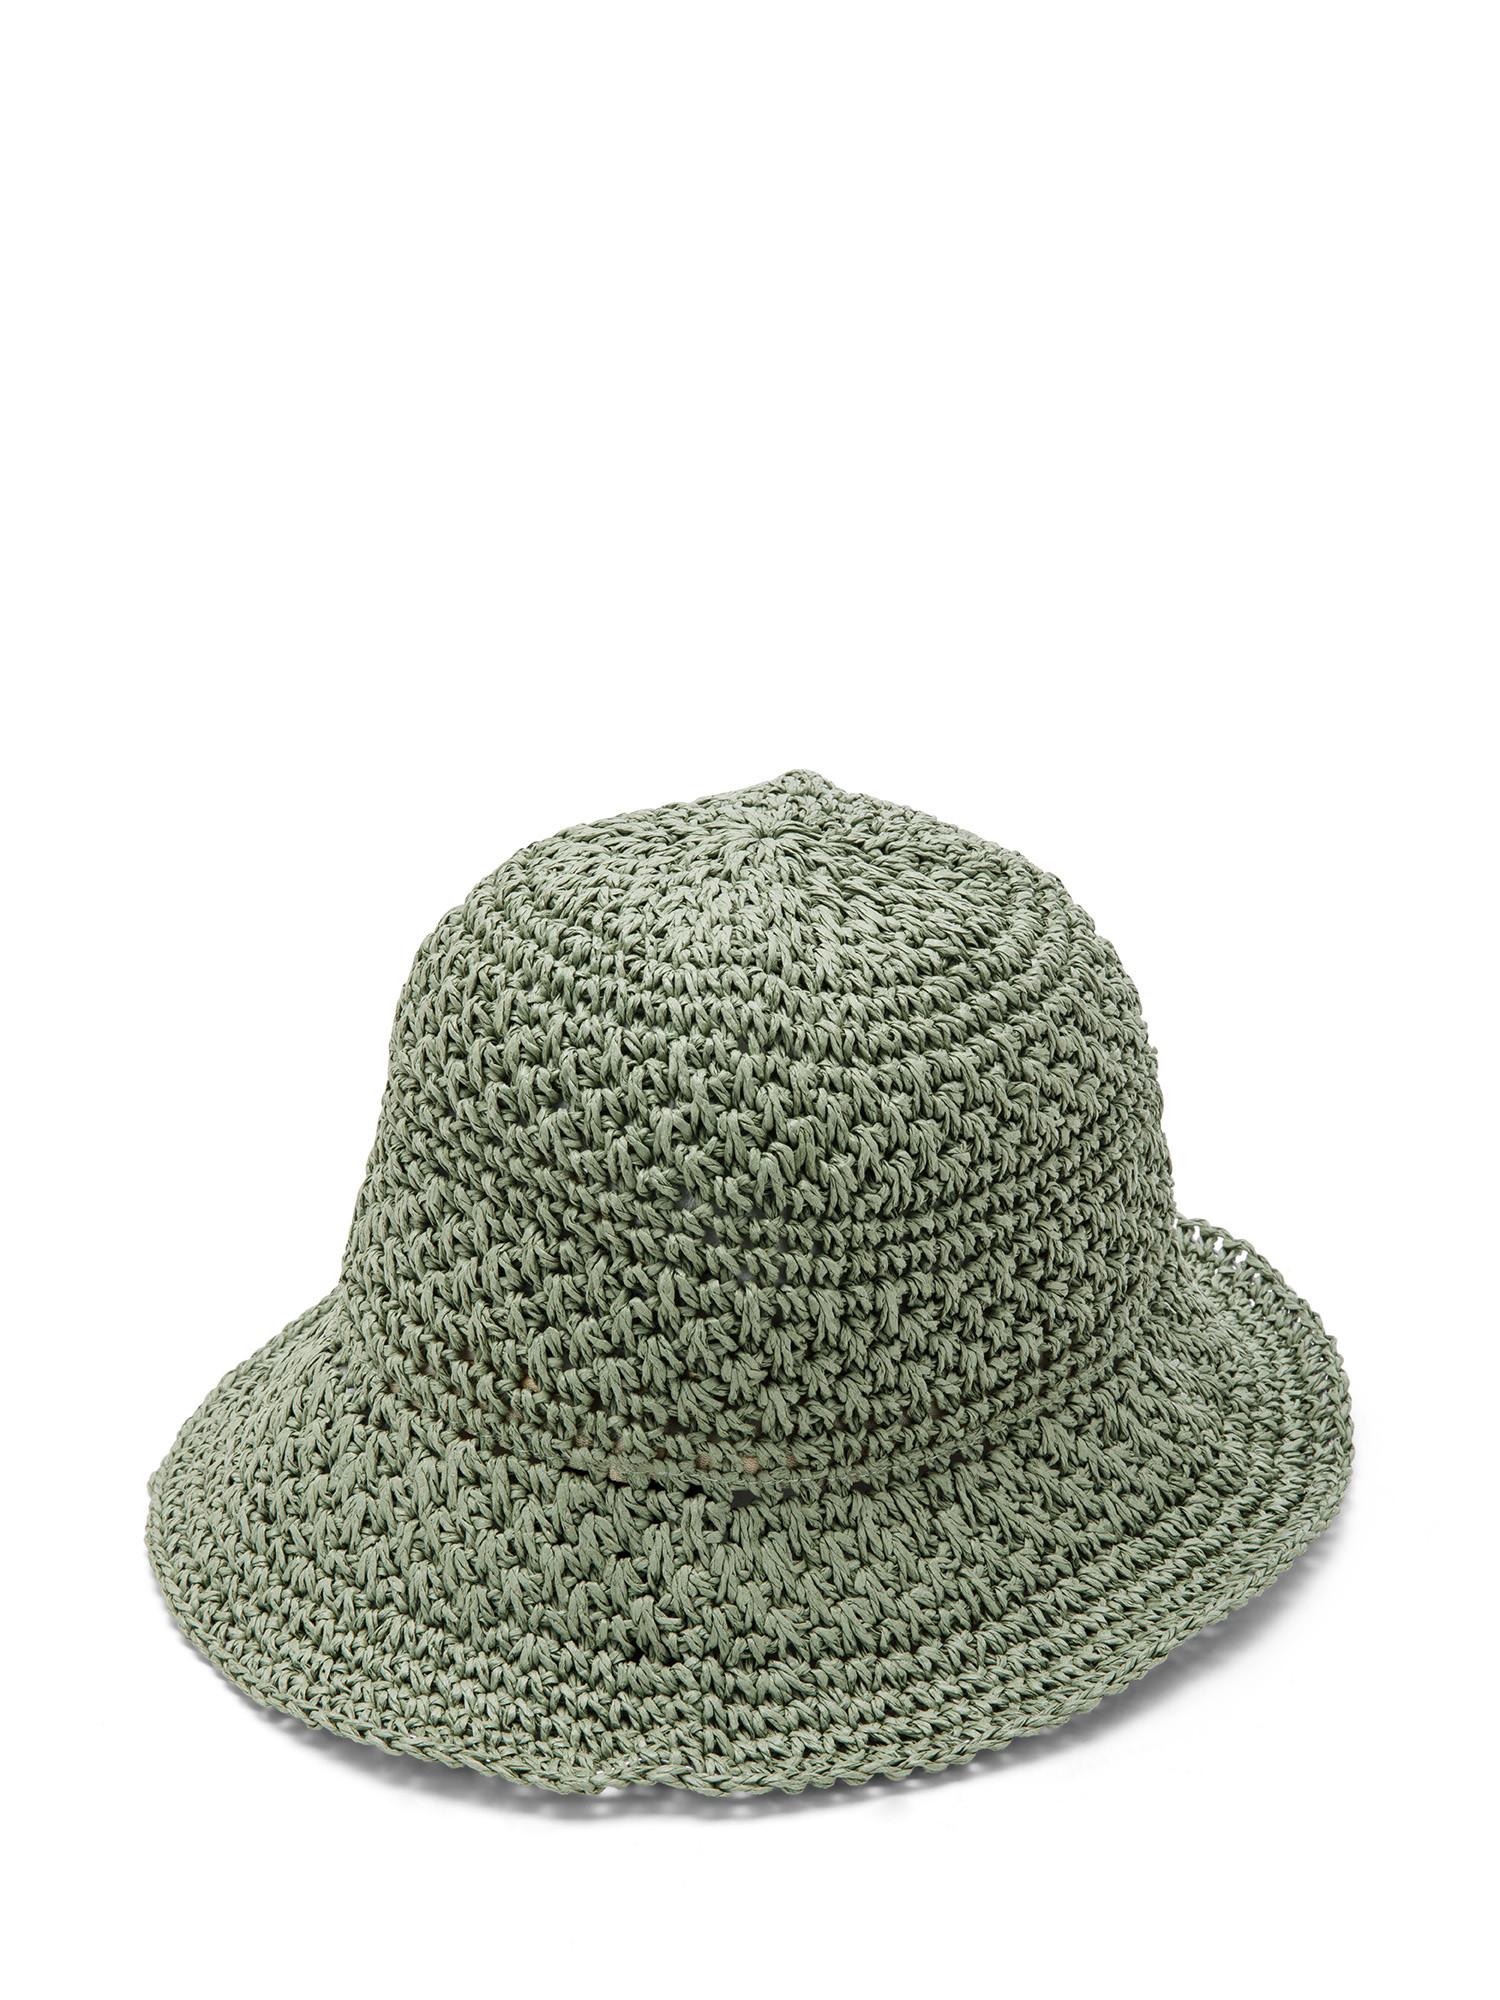 Koan - Braided hat, Olive Green, large image number 0